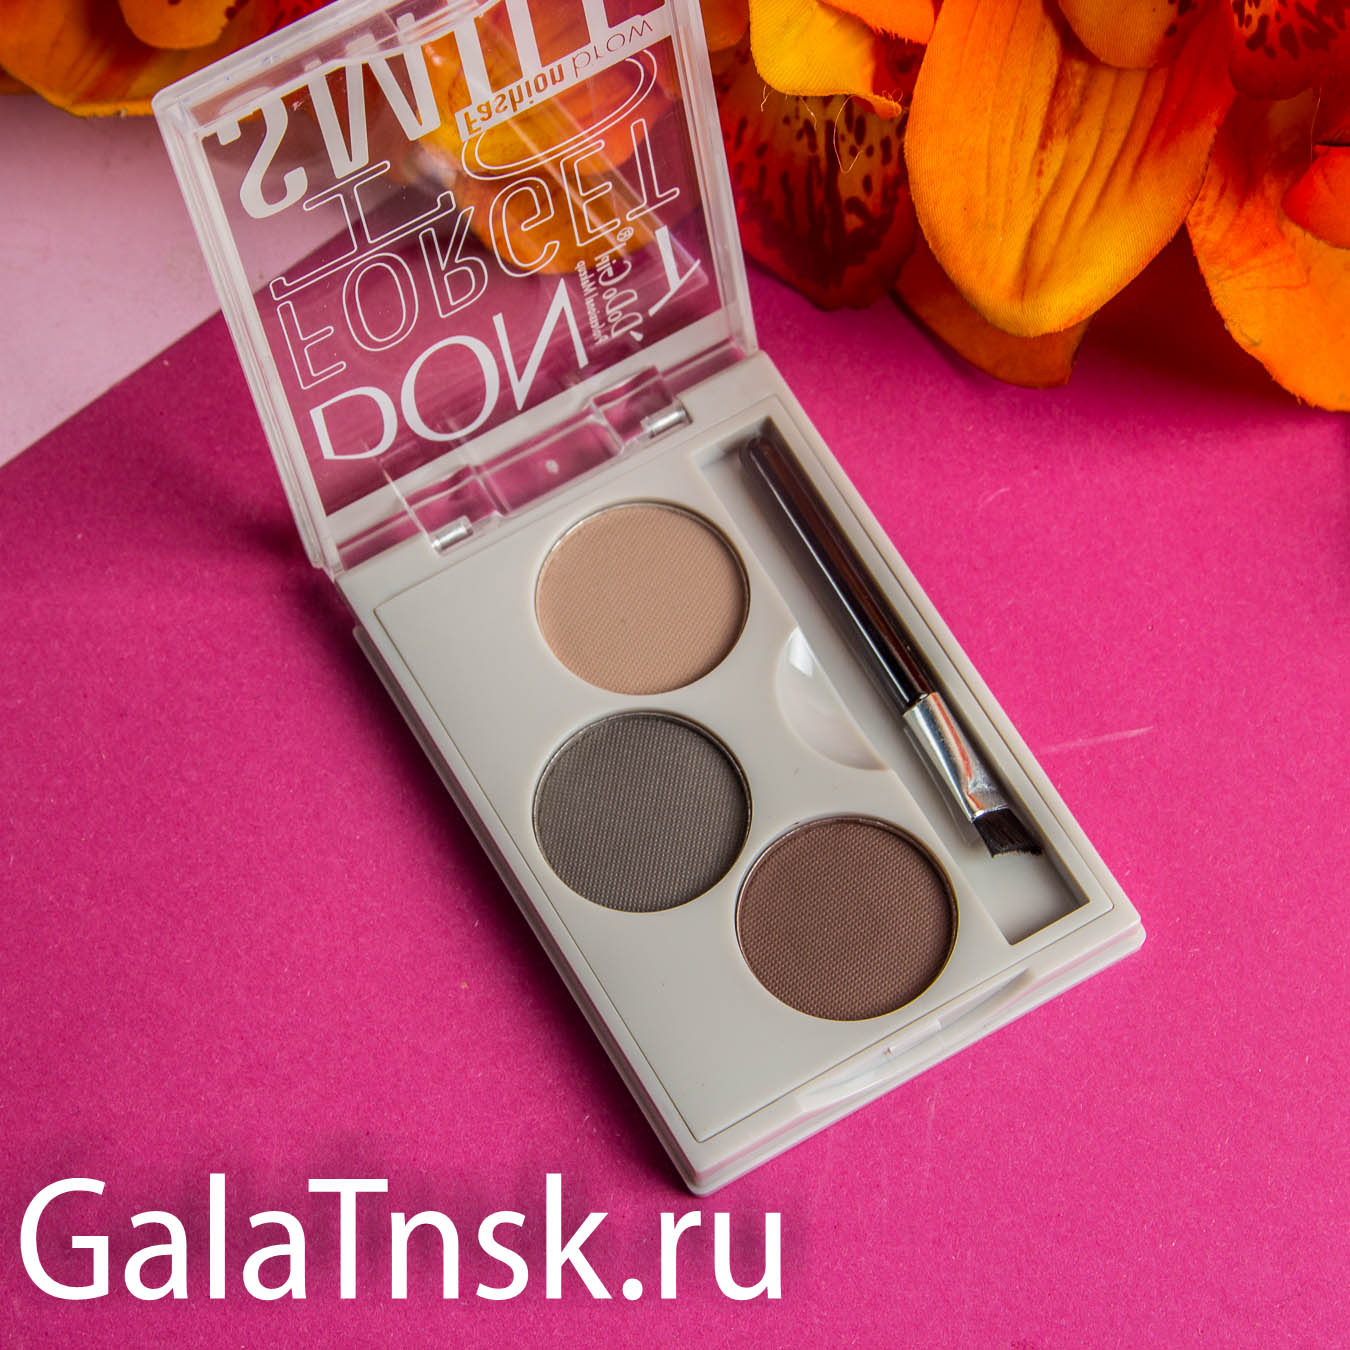 DO DO GIPL Тени для бровей 3colors DON`T FORGET TO SMILE BP022 01